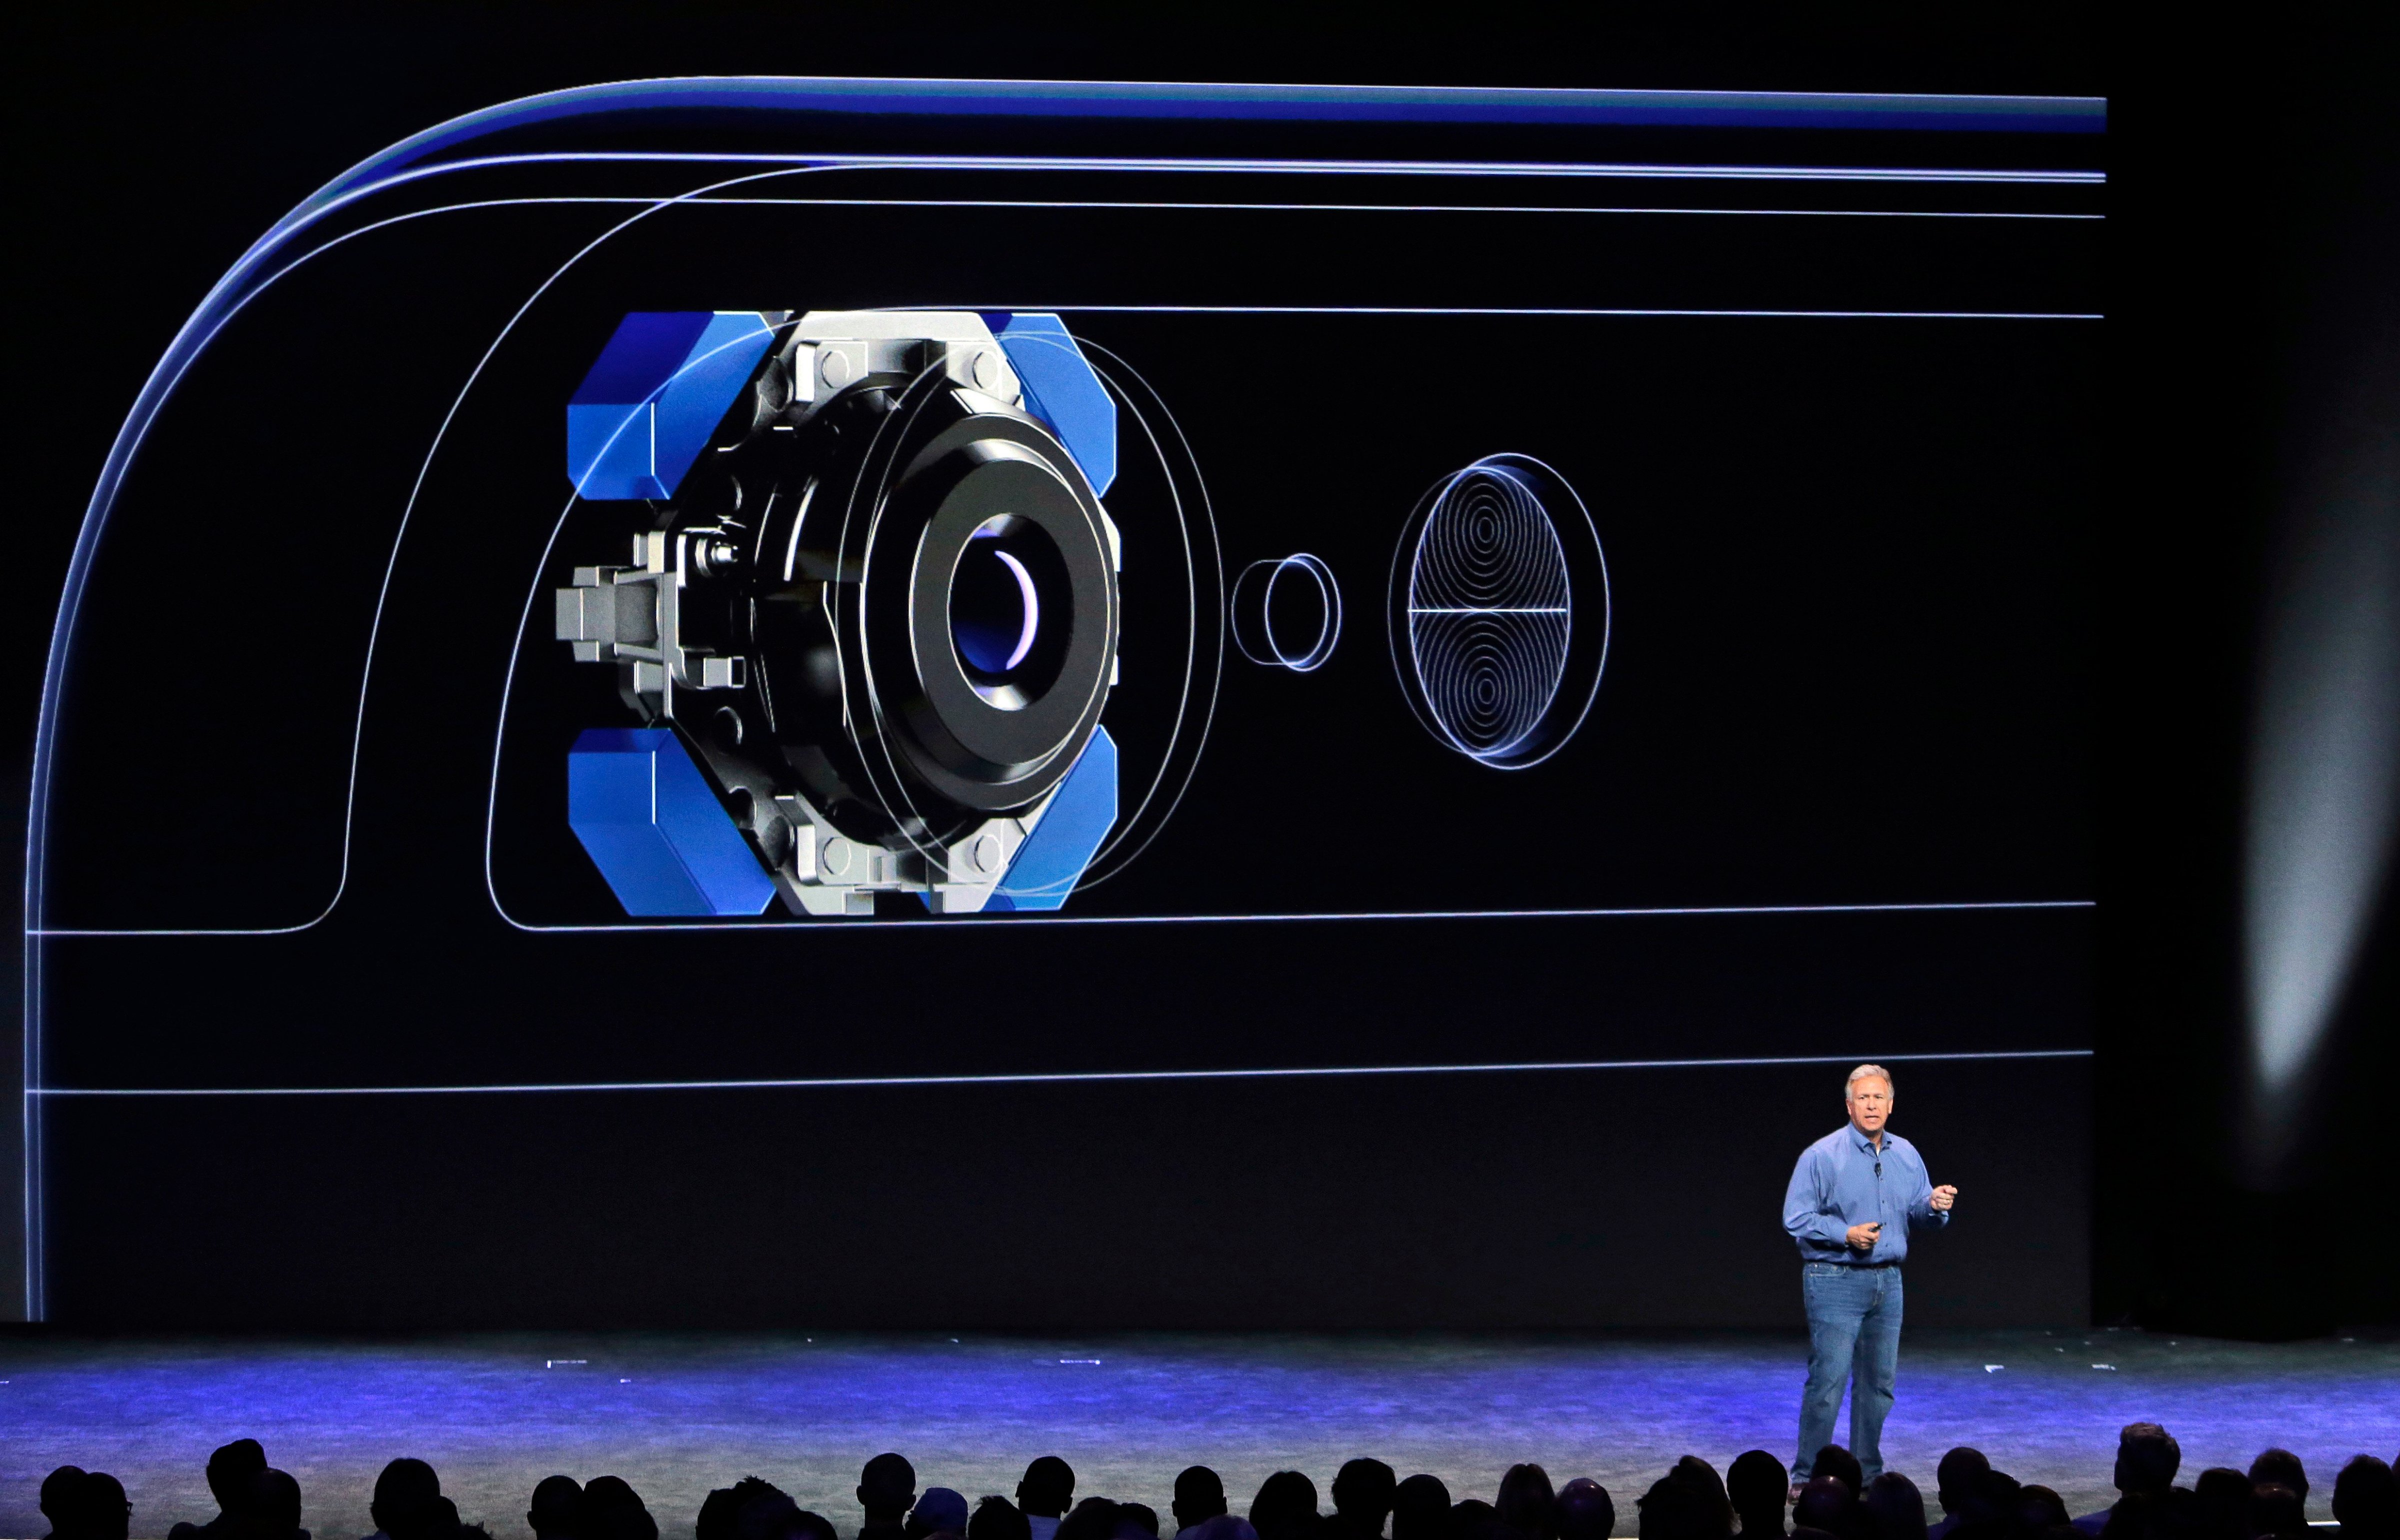 Phil Schiller, Apple's senior vice president of worldwide product marketing, discusses the camera features on the new iPhone 6 and iPhone 6 plus on Sept. 9, 2014, in Cupertino, Calif. (Marcio Jose Sanchez—AP)